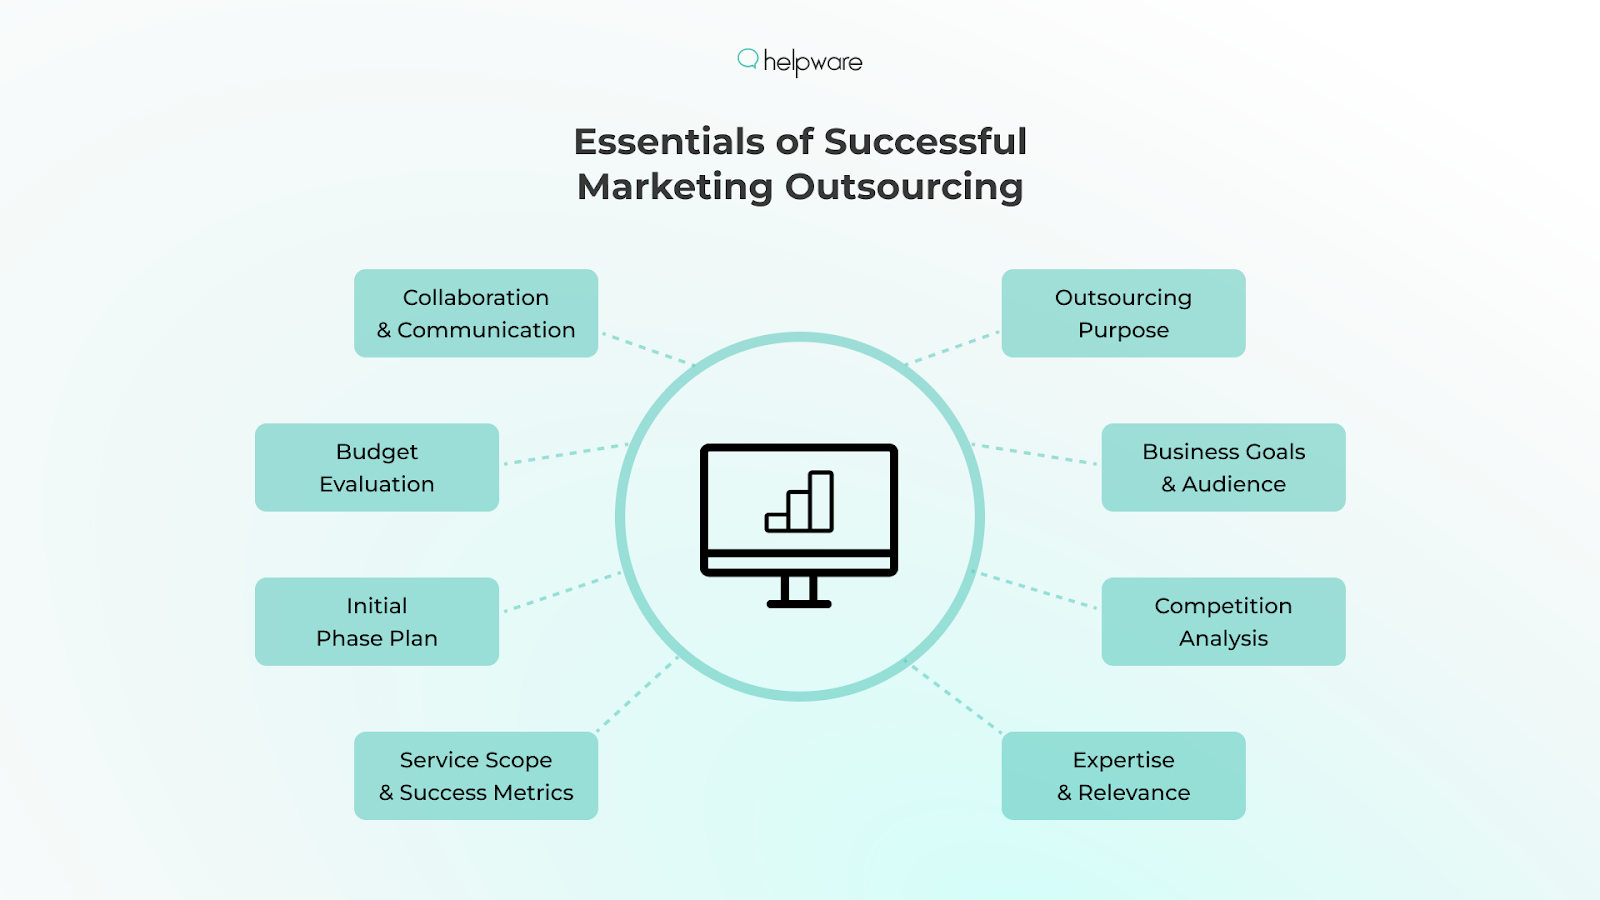 Essentials of Successful Marketing Outsourcing